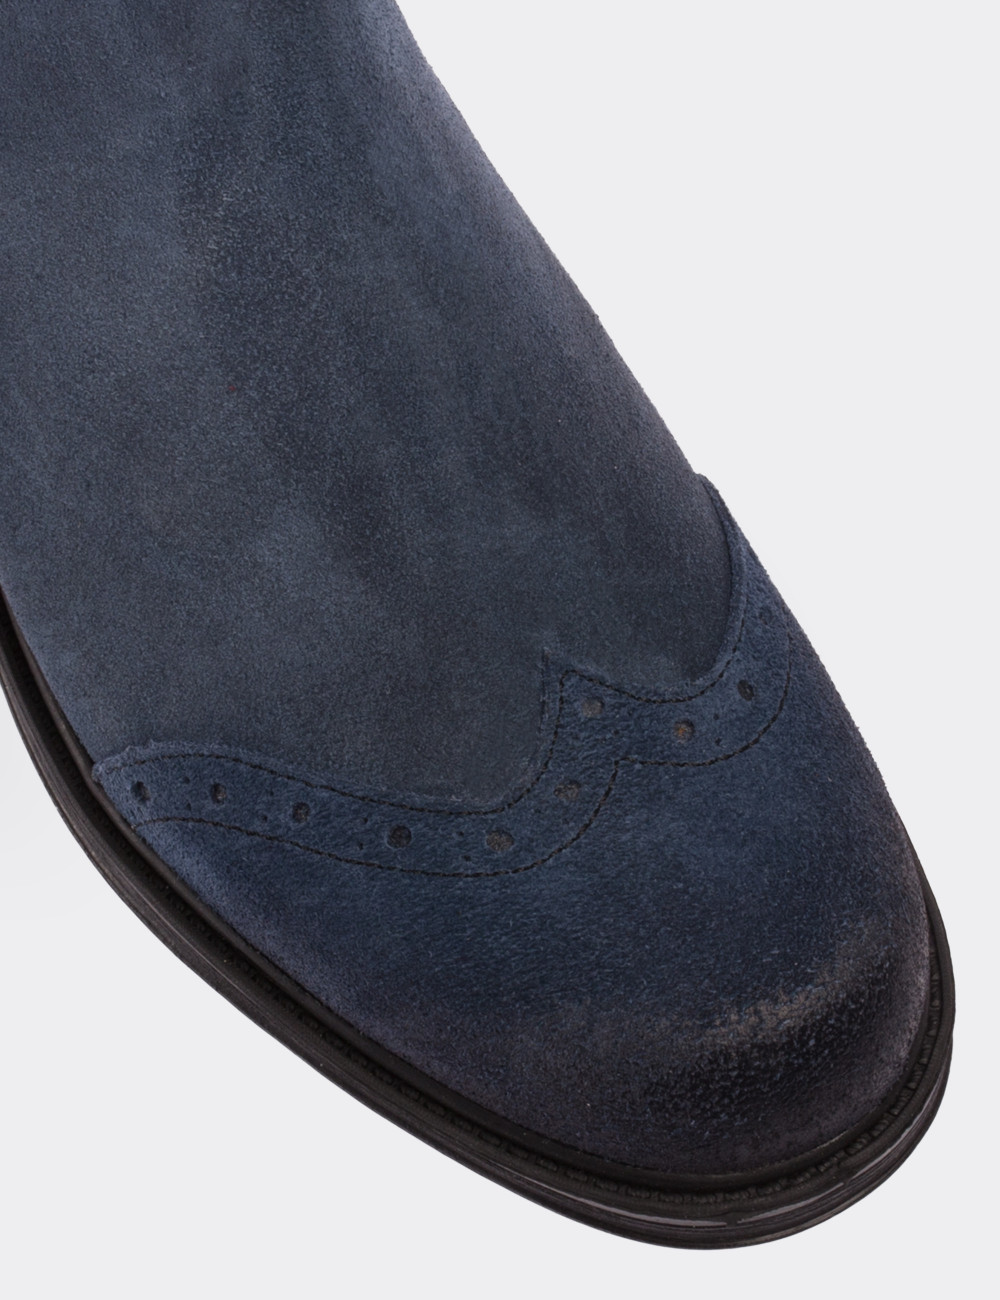 Blue Suede Leather Chelsea Boots - 01572ZMVIC01